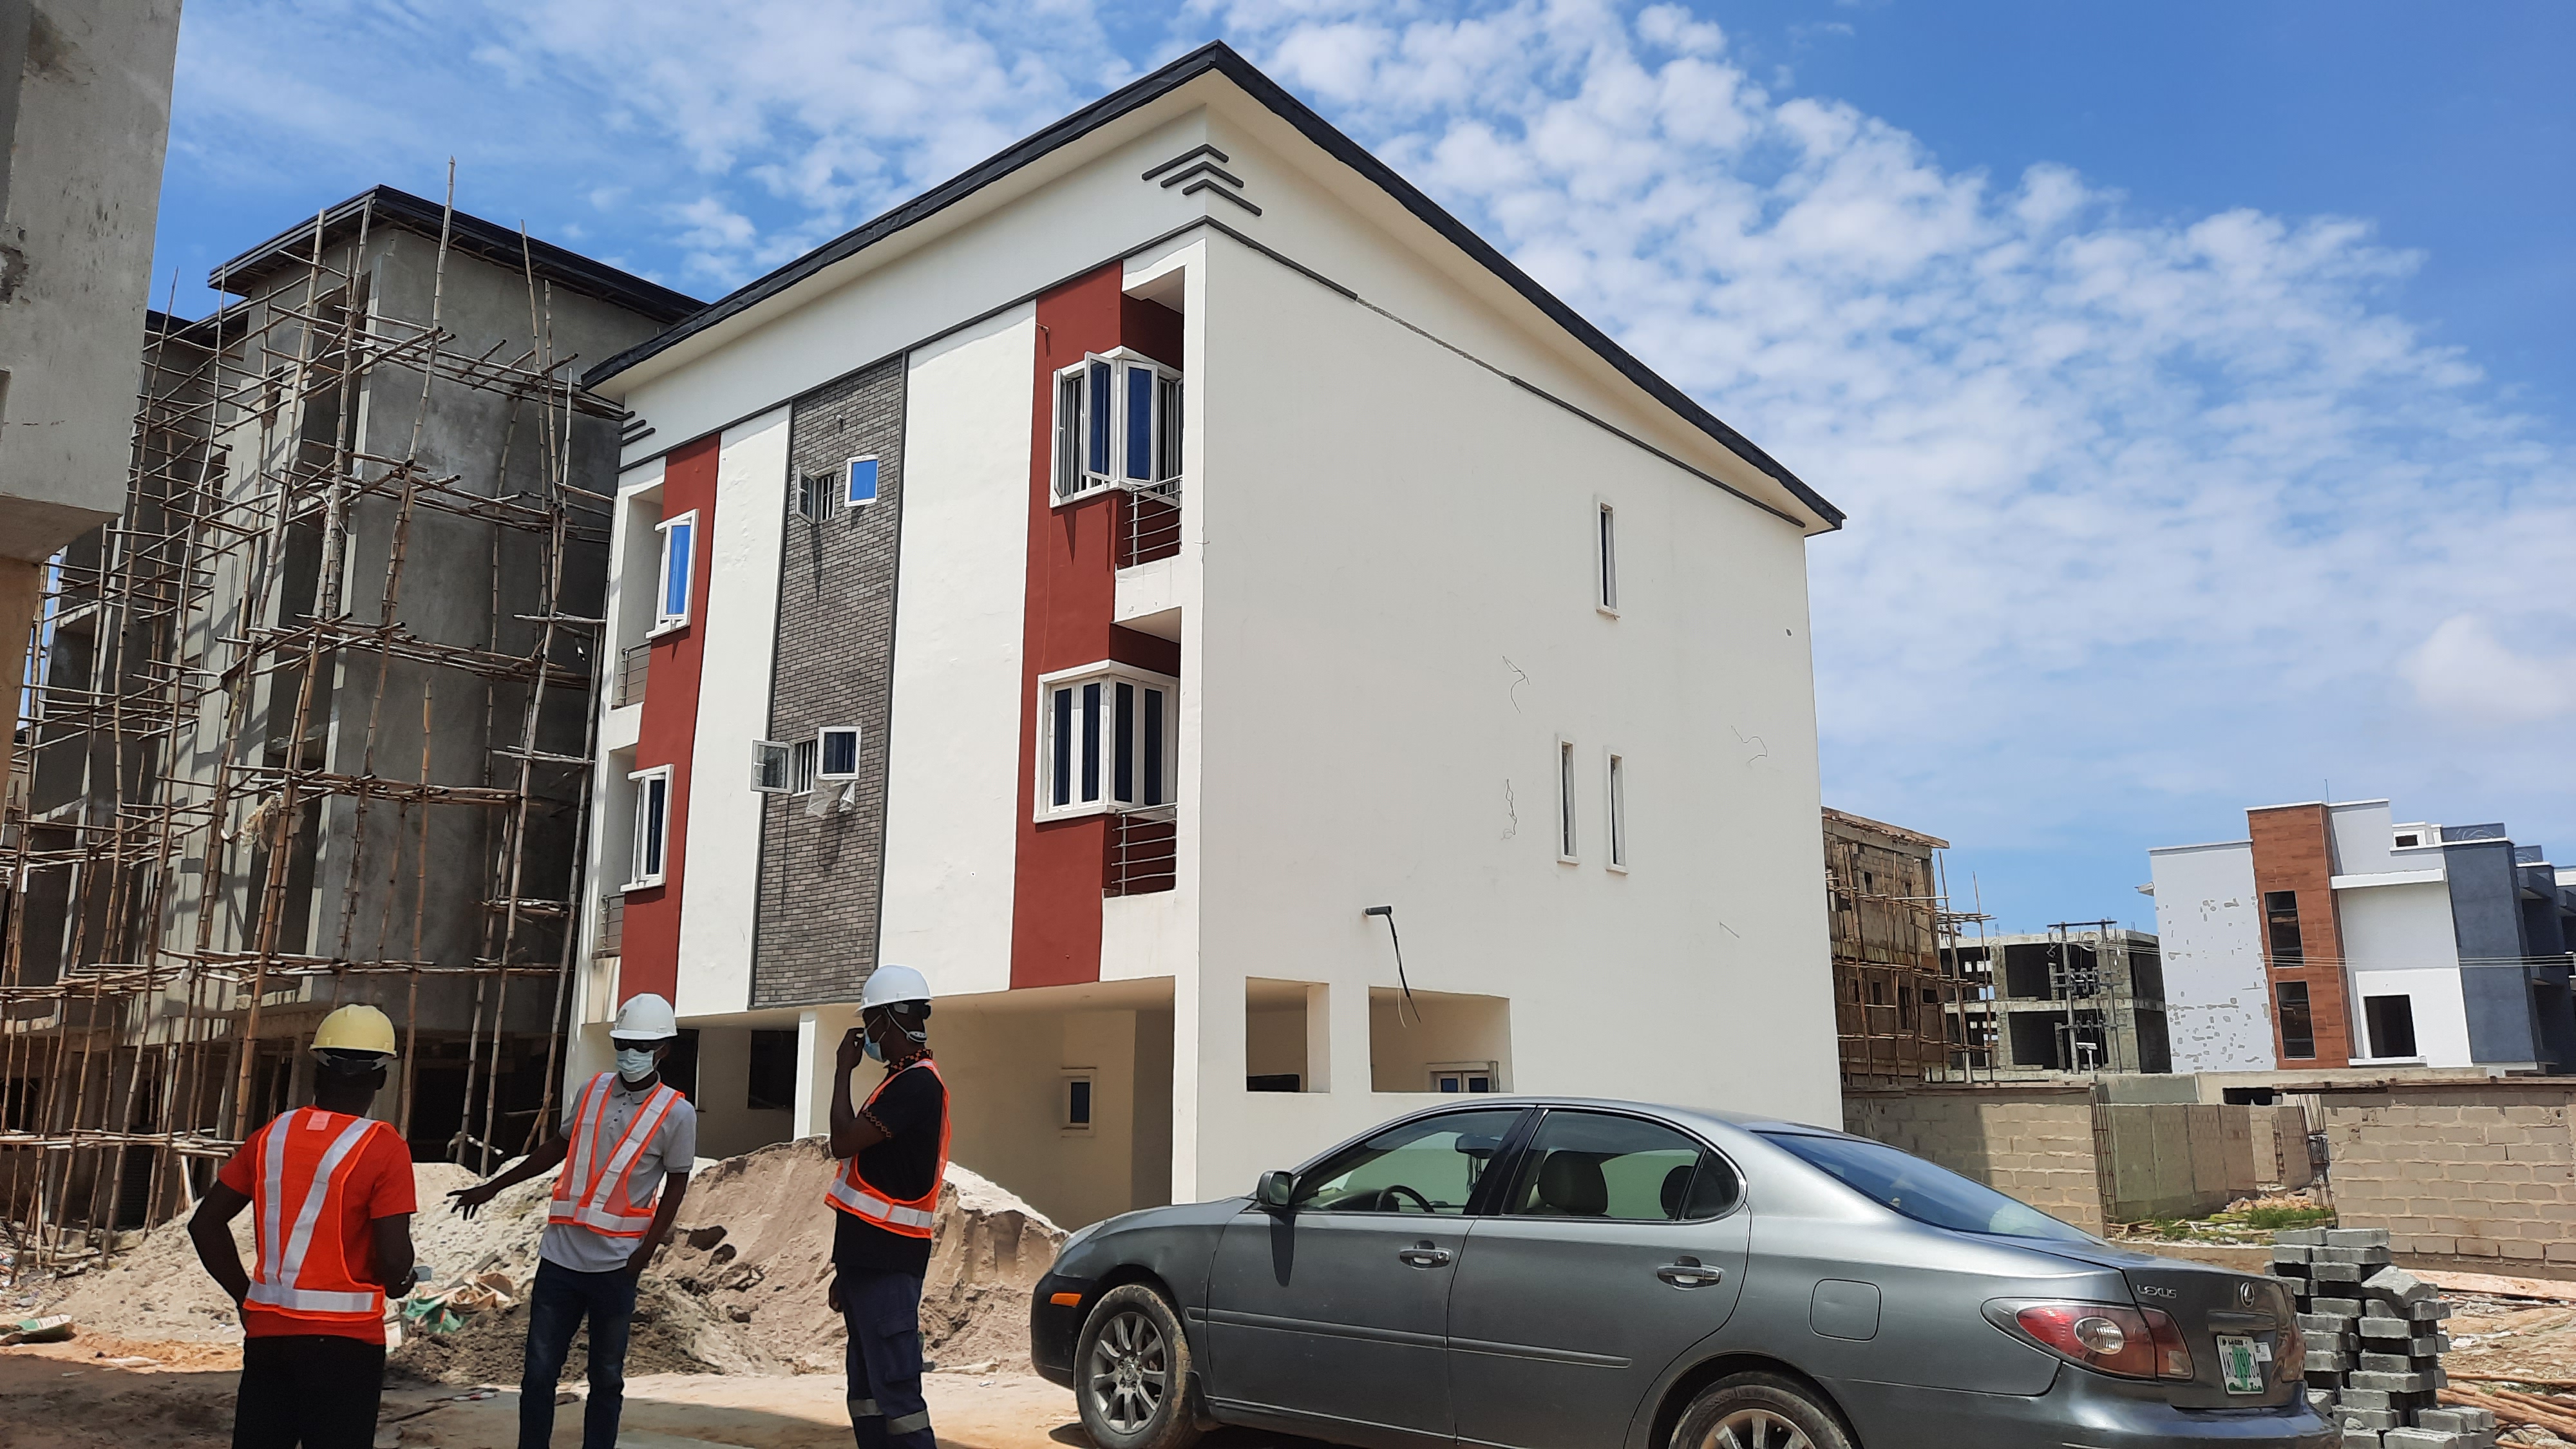 4 bedrooms Terraced Duplex for sale at Ikate